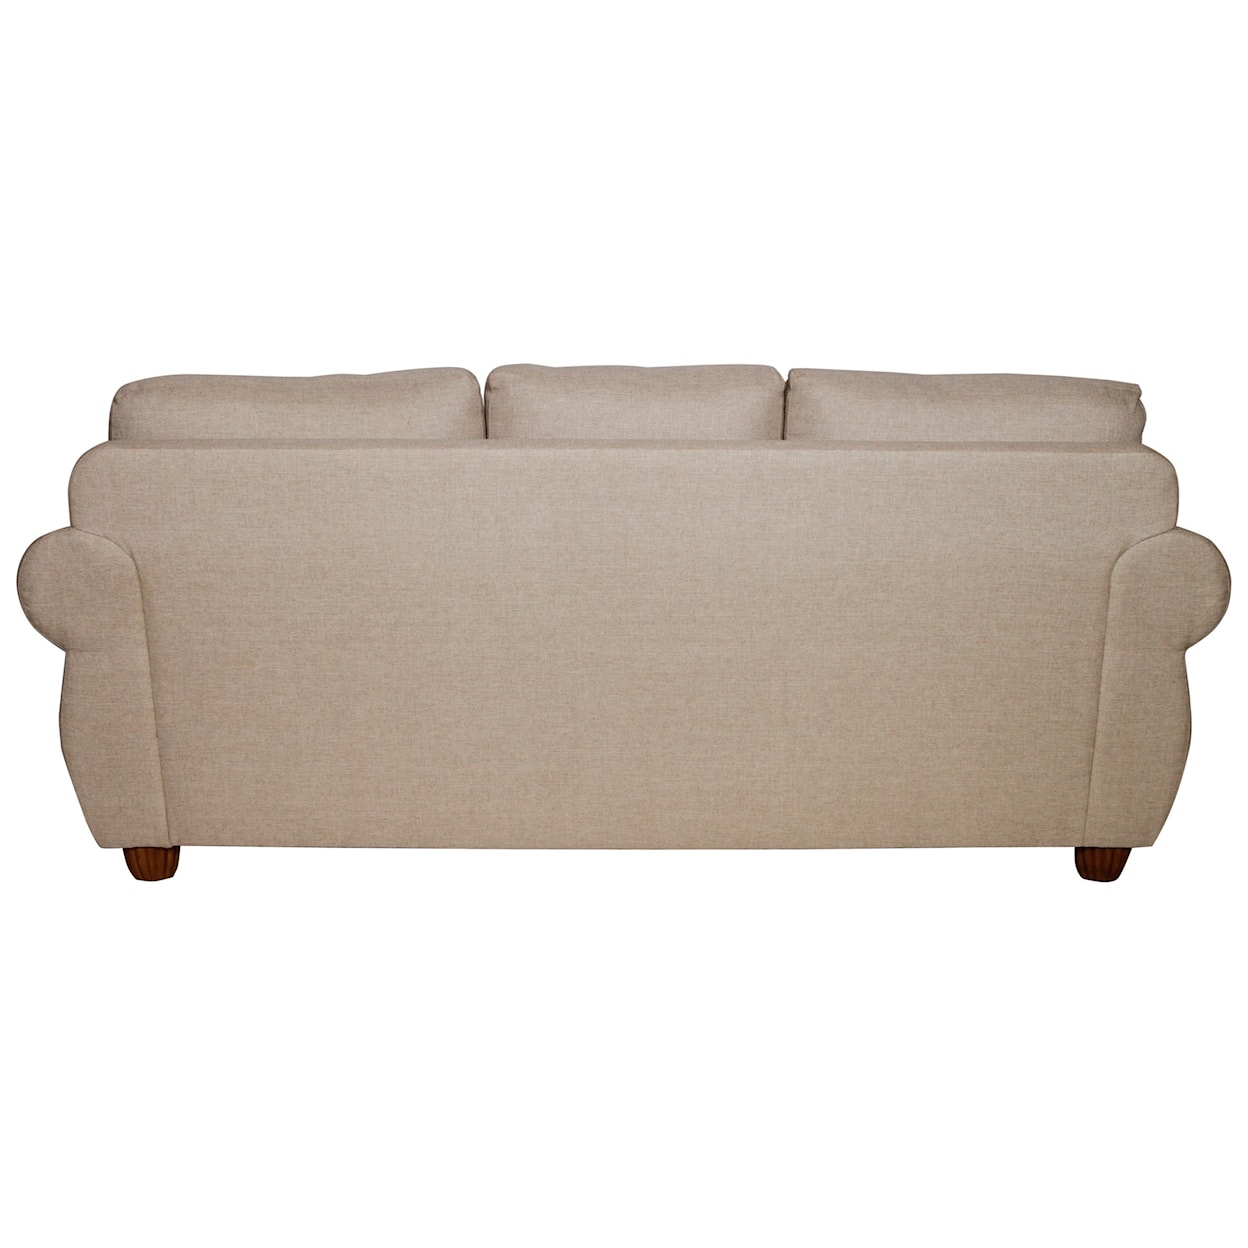 Synergy Home Furnishings 1374 Sofa with Woven Rattan Detail